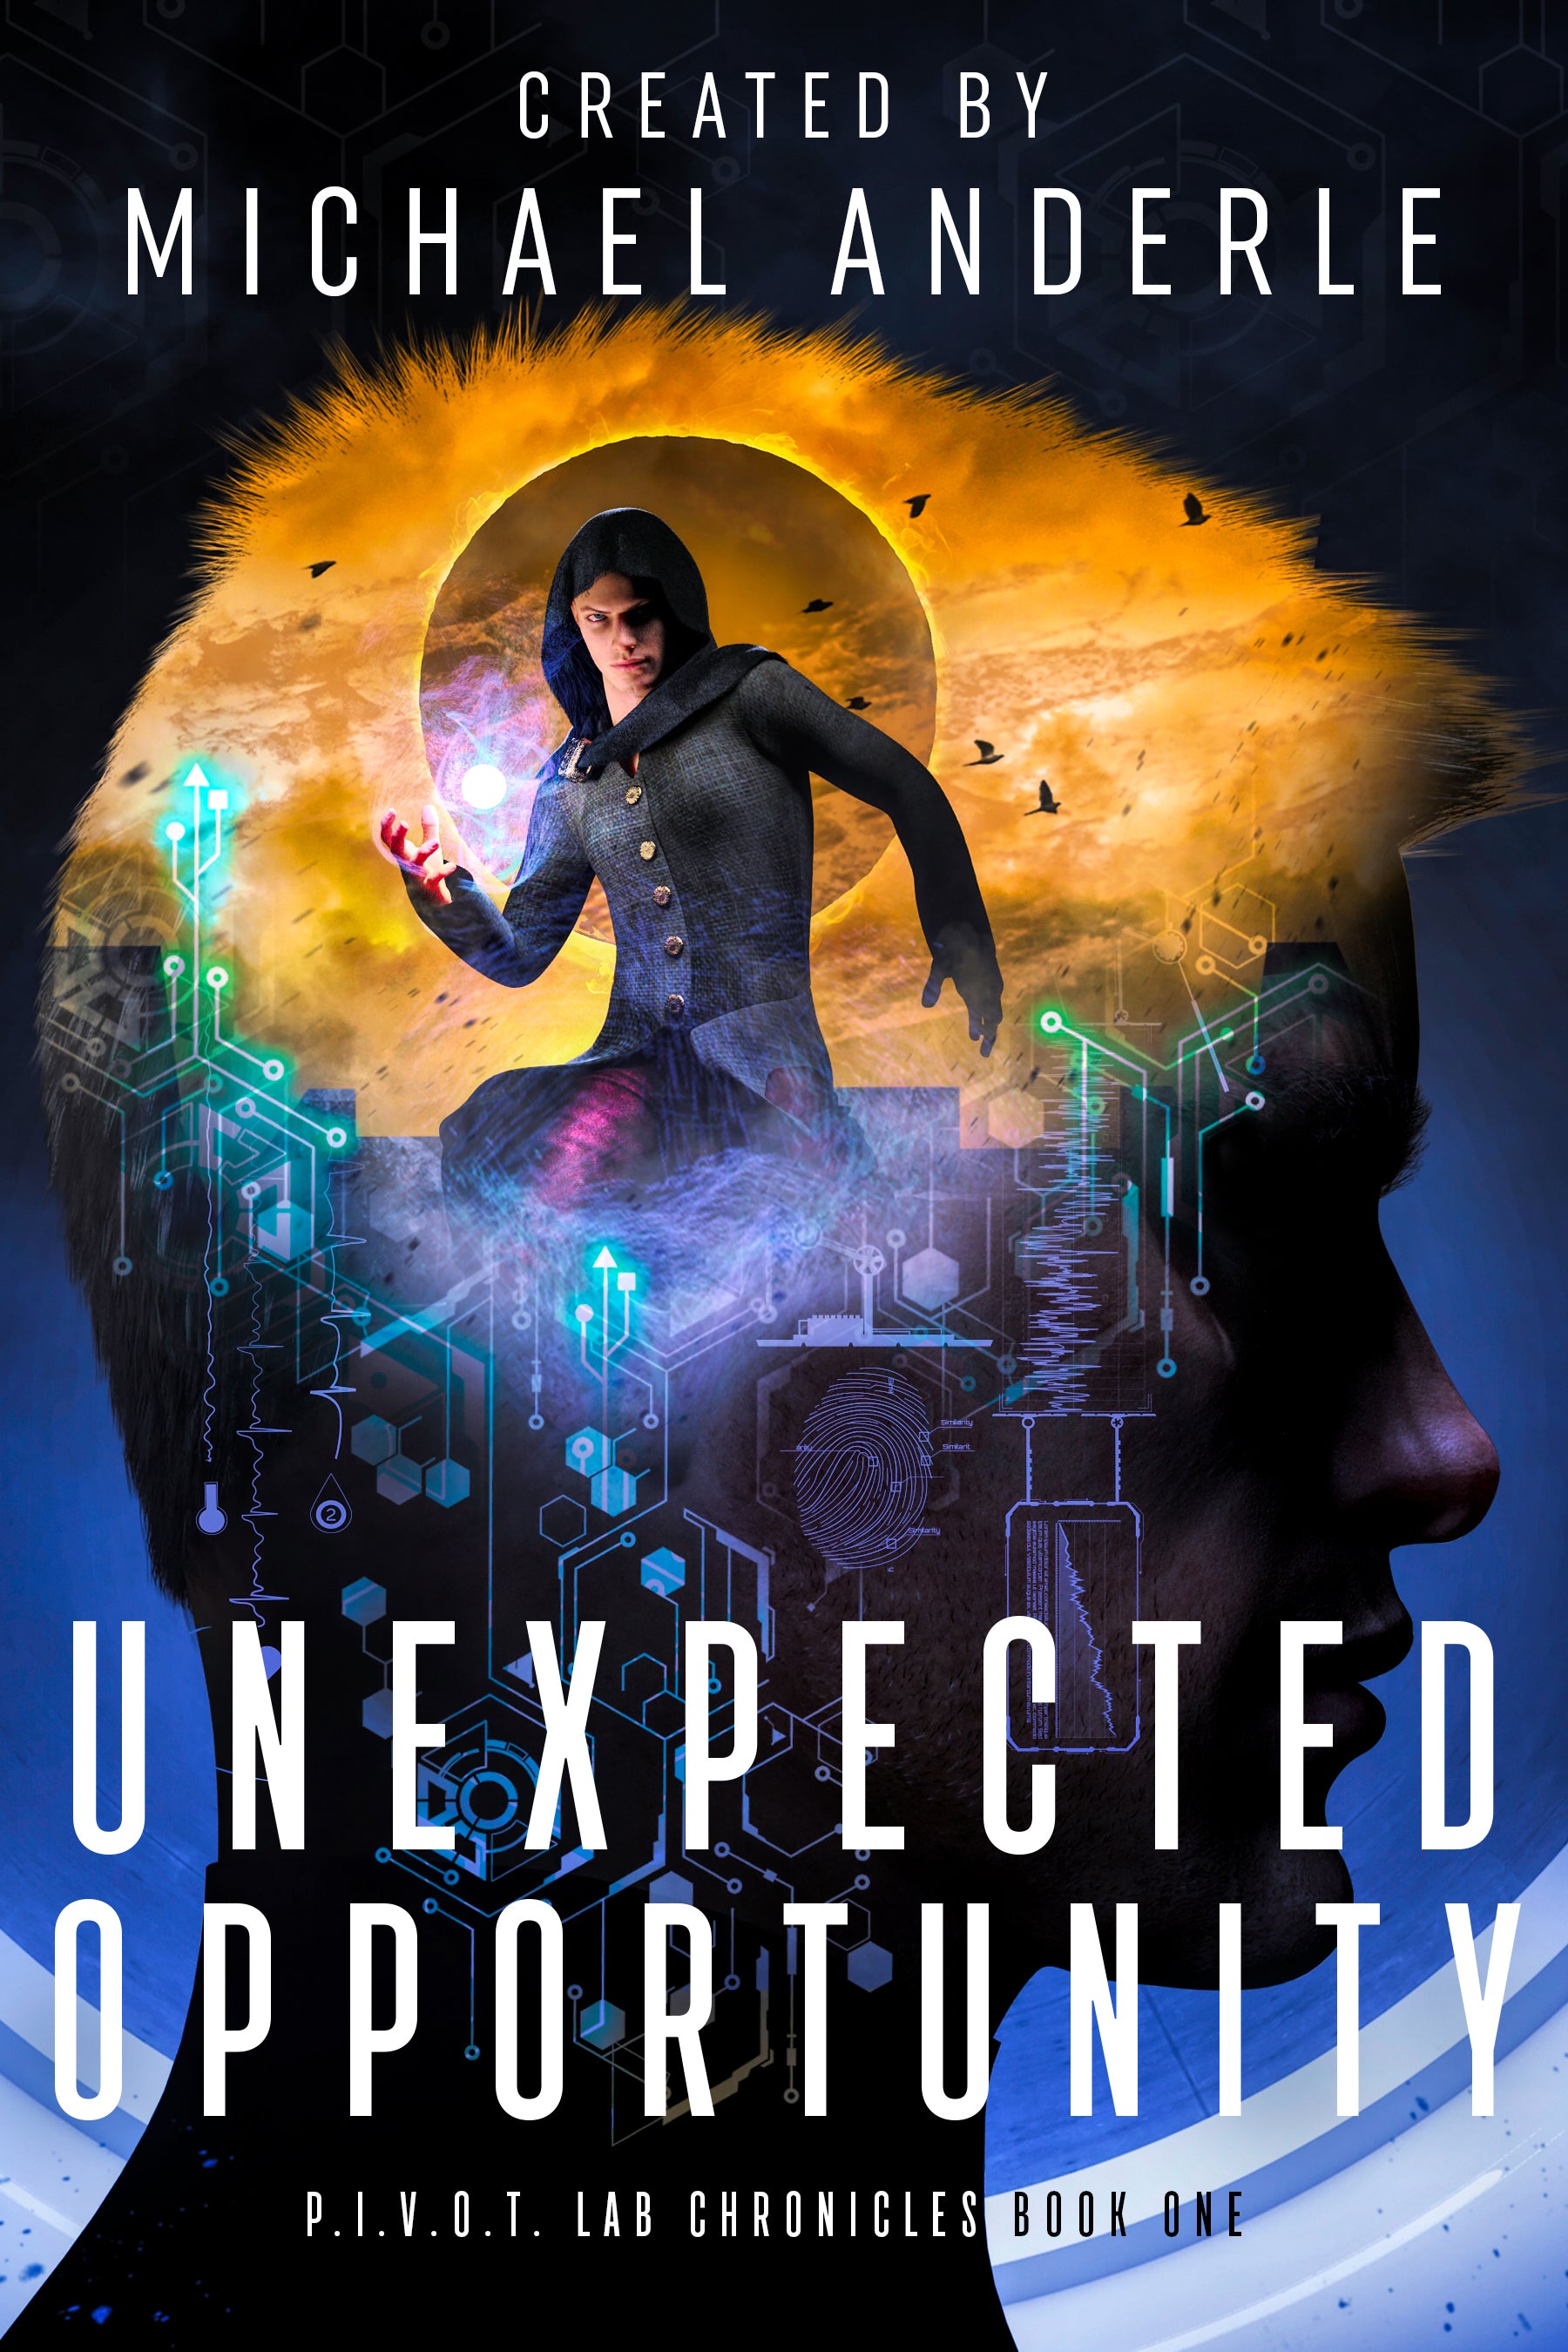 Book 1: Unexpected Opportunity